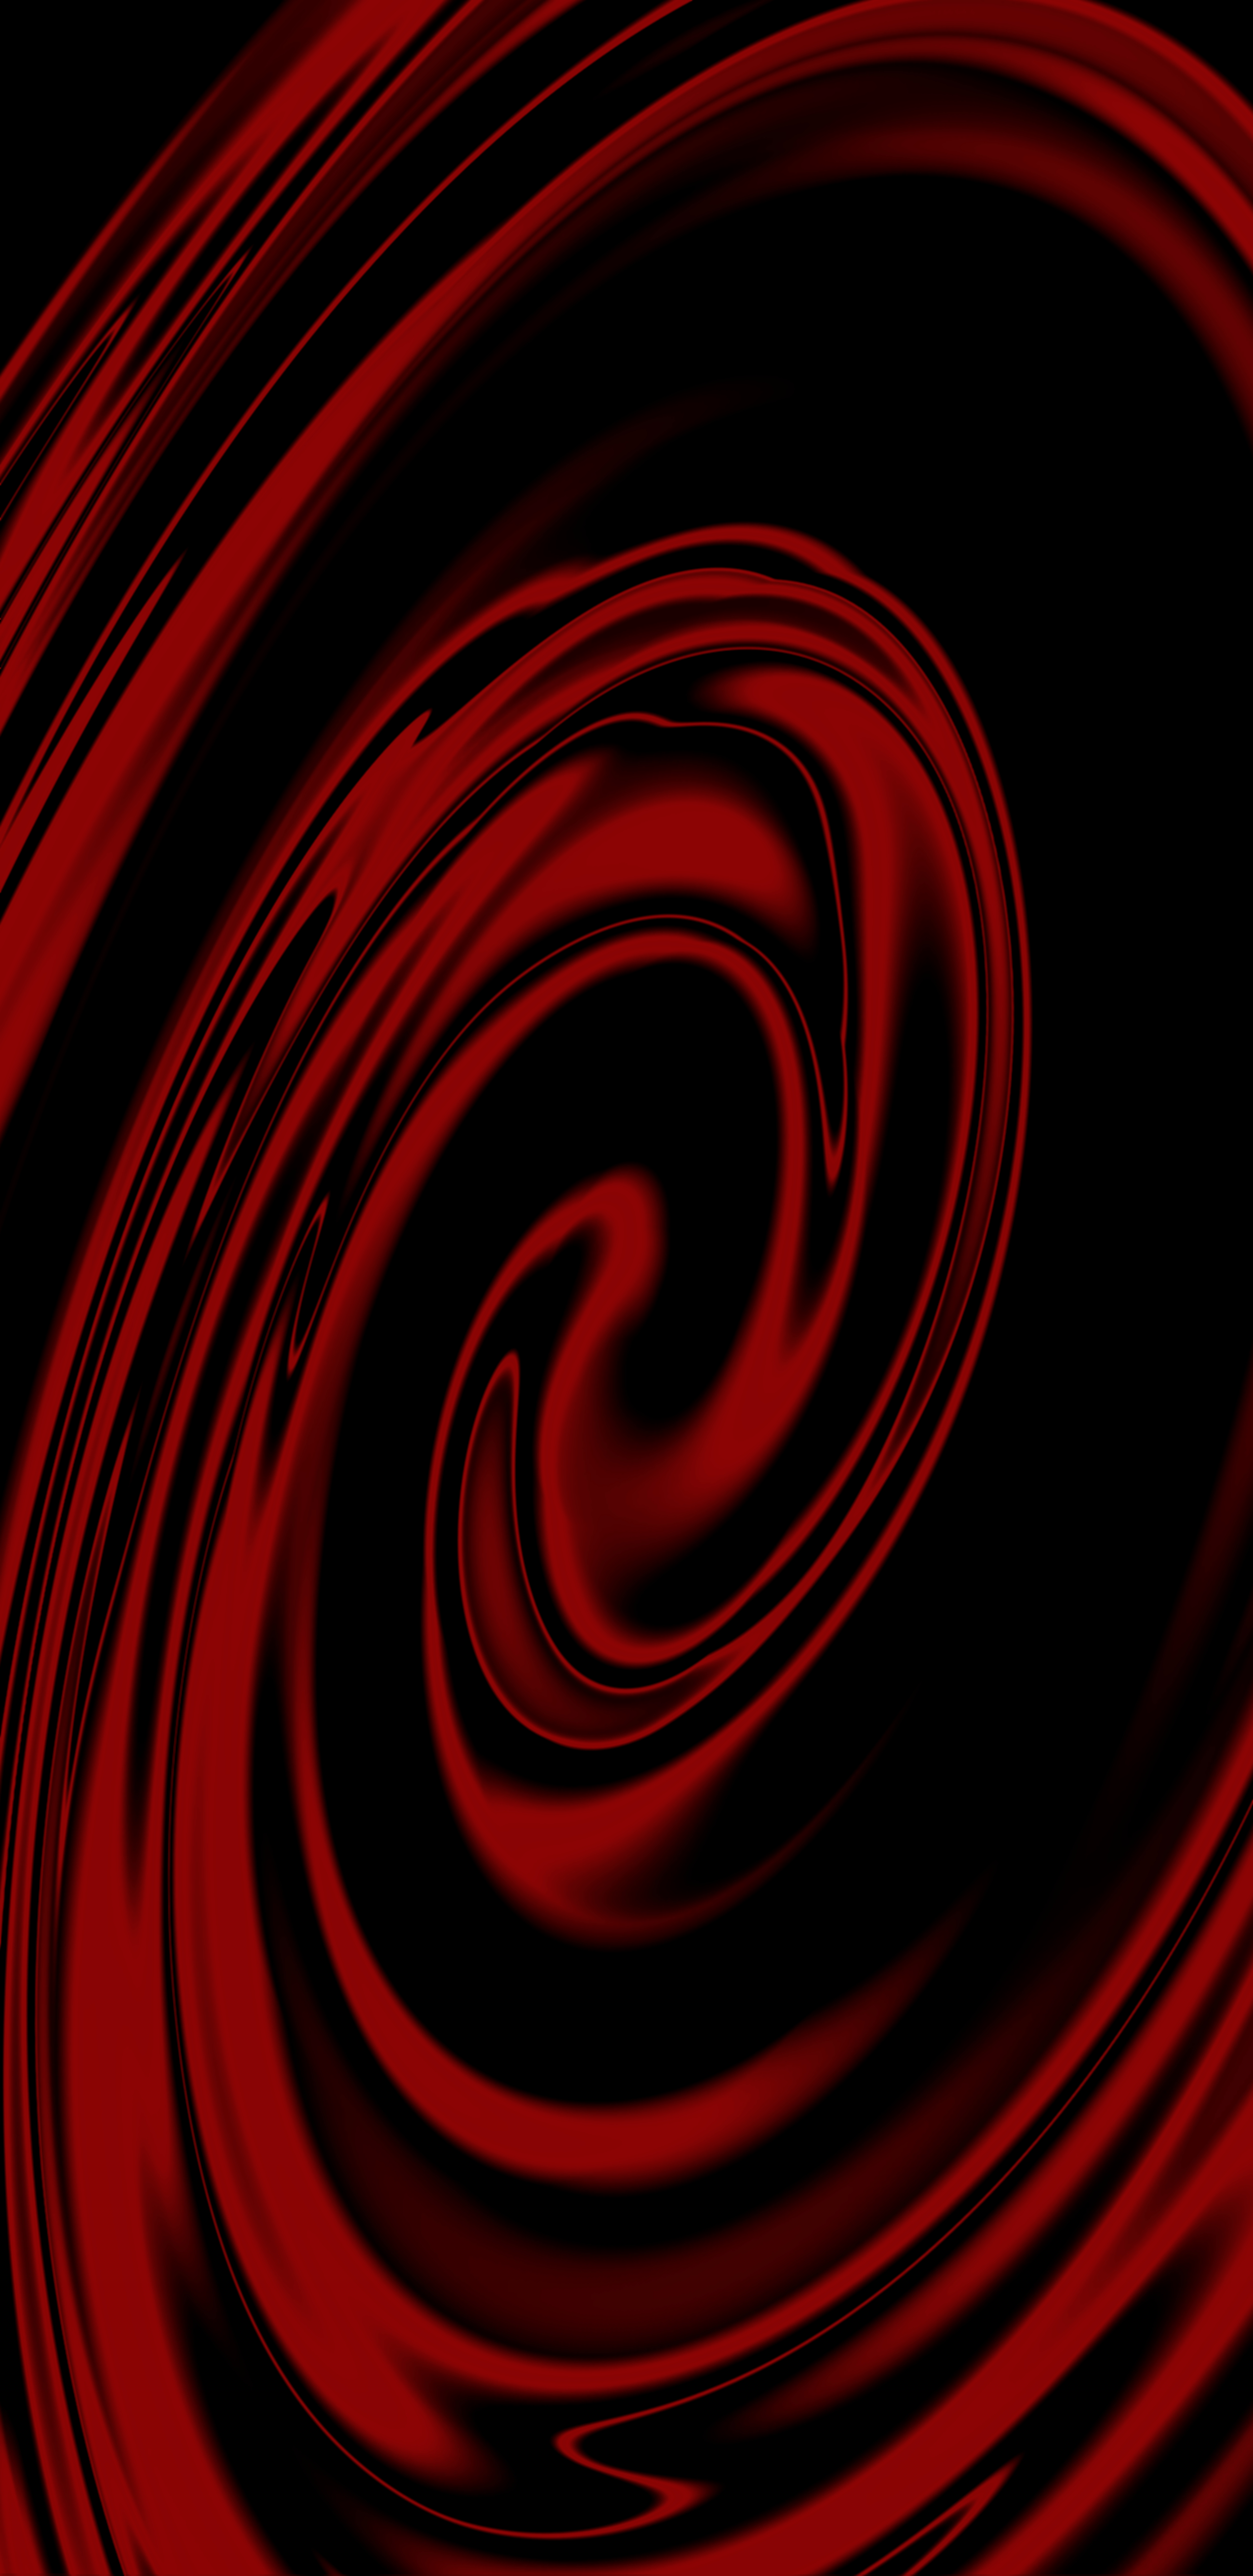 involute, abstract, black, red, spiral, swirling cellphone